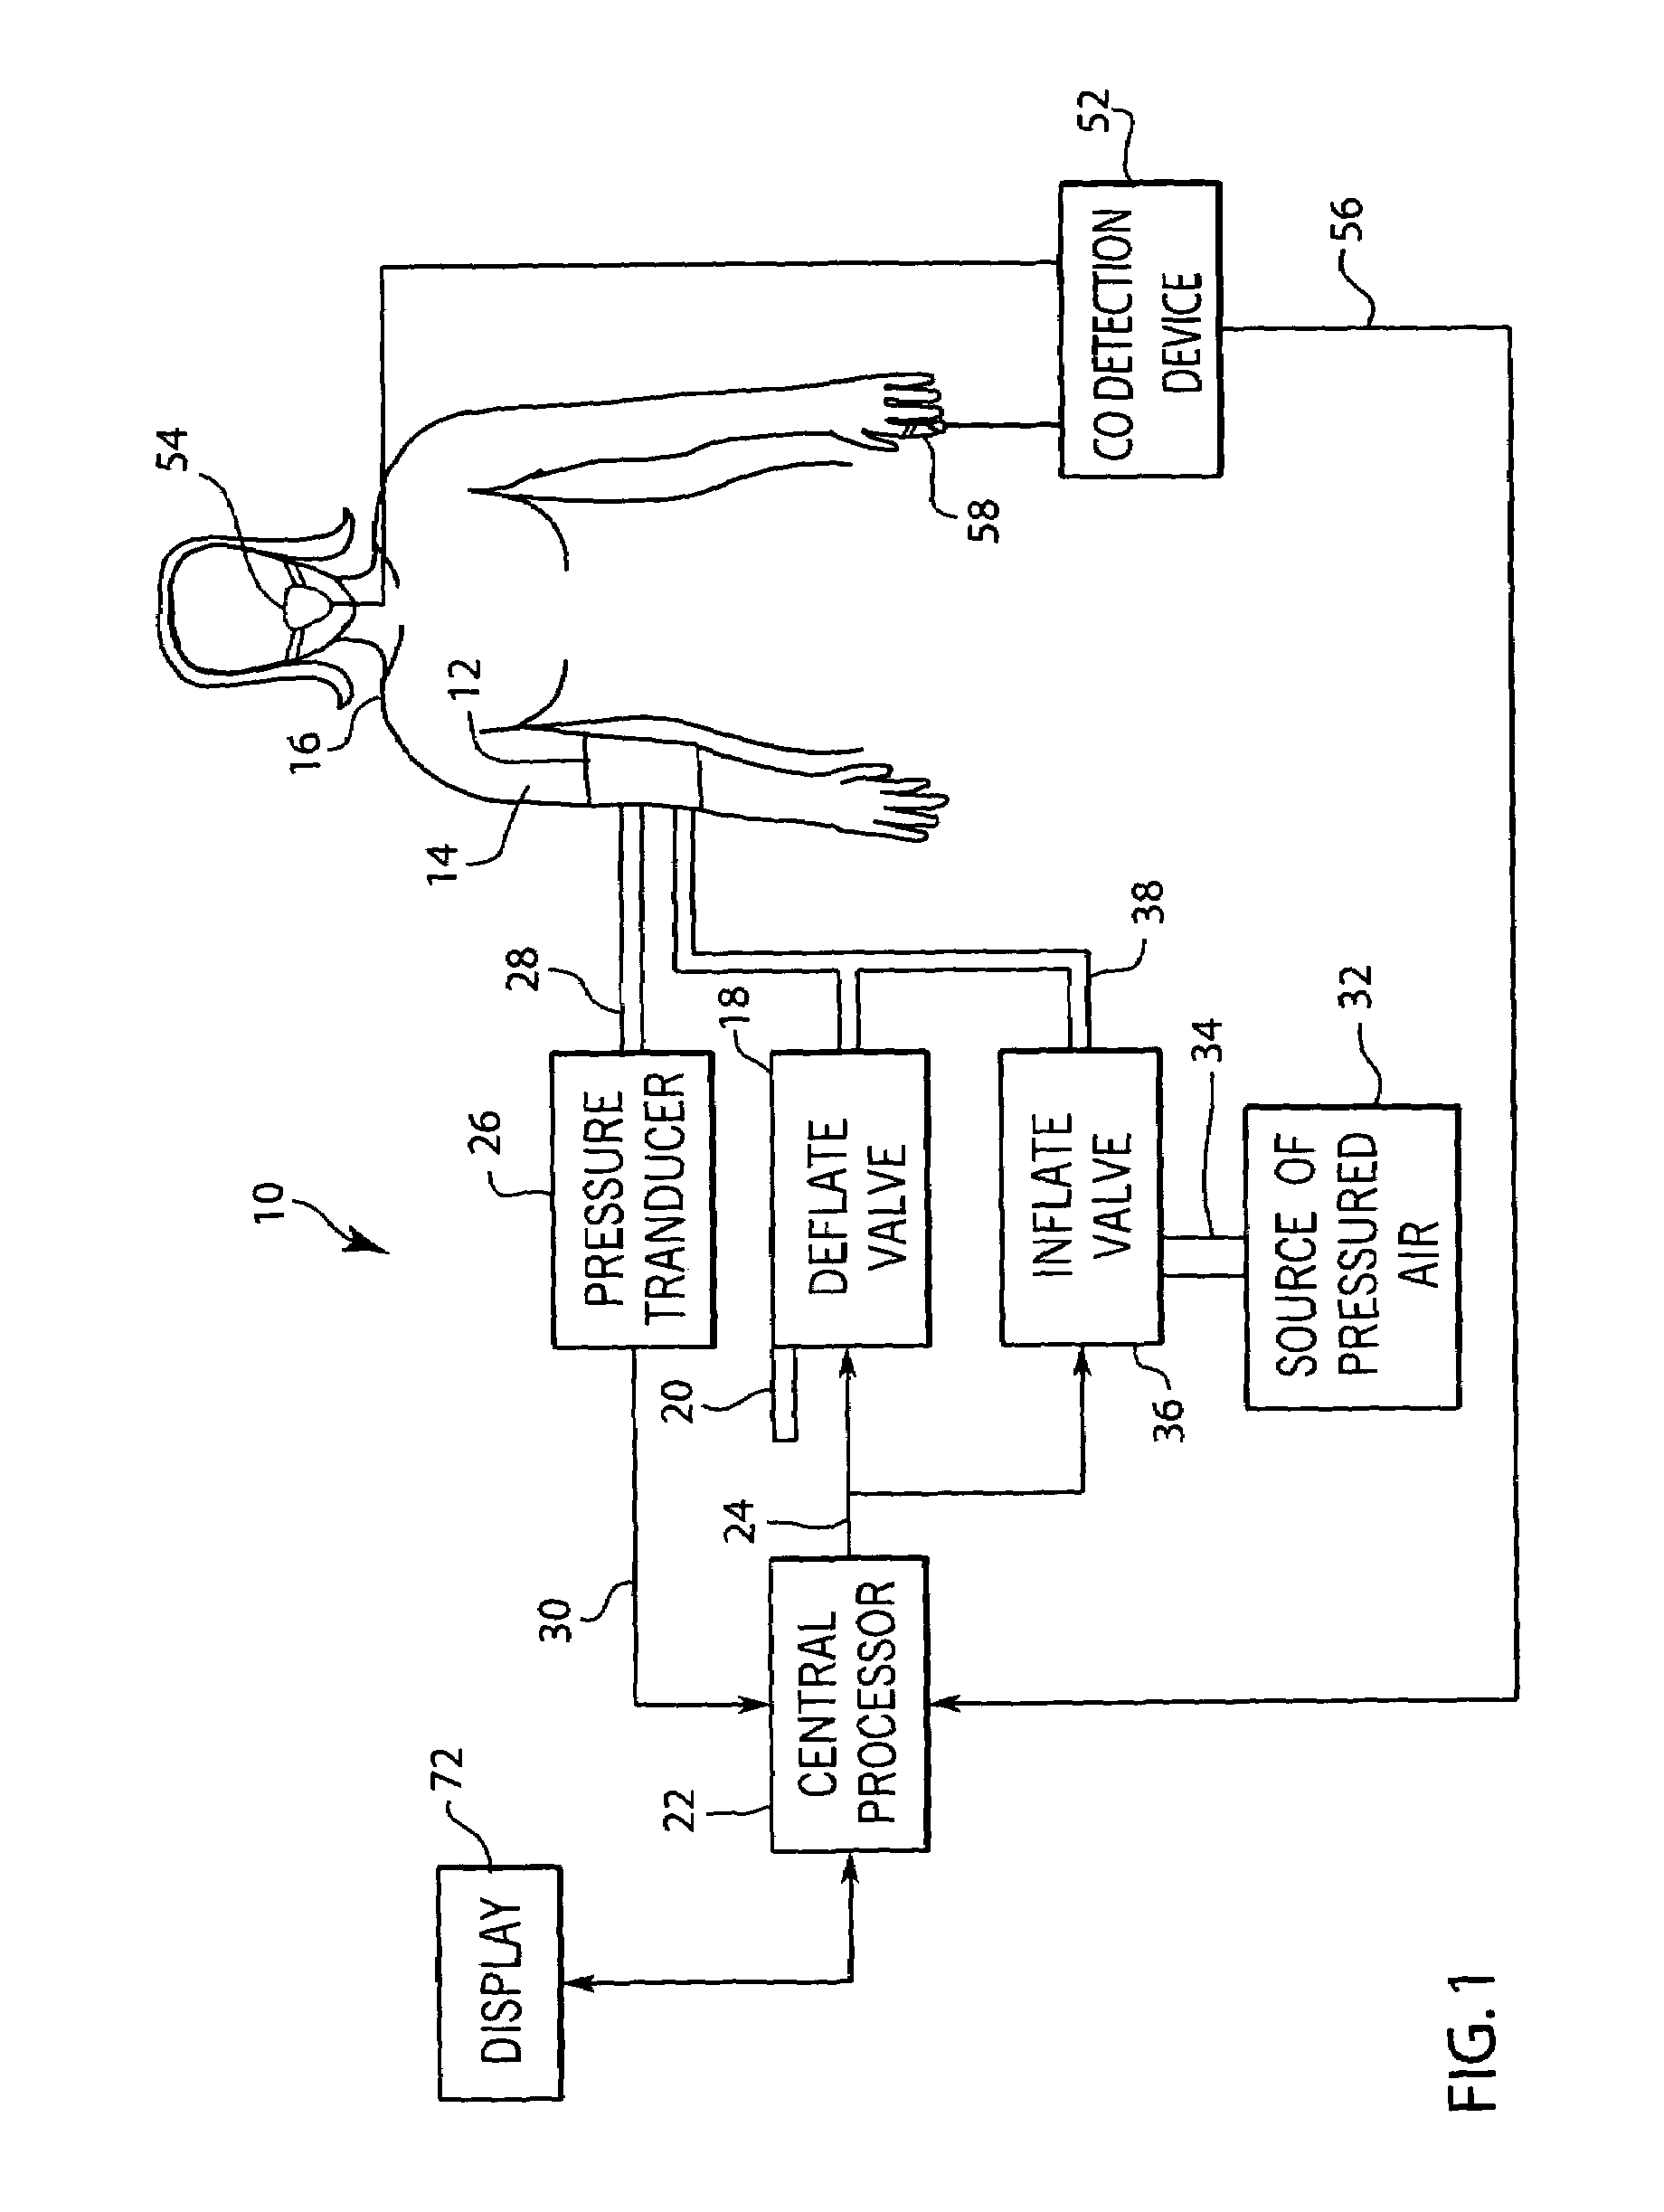 System and method for monitoring pre-eclamptic patients